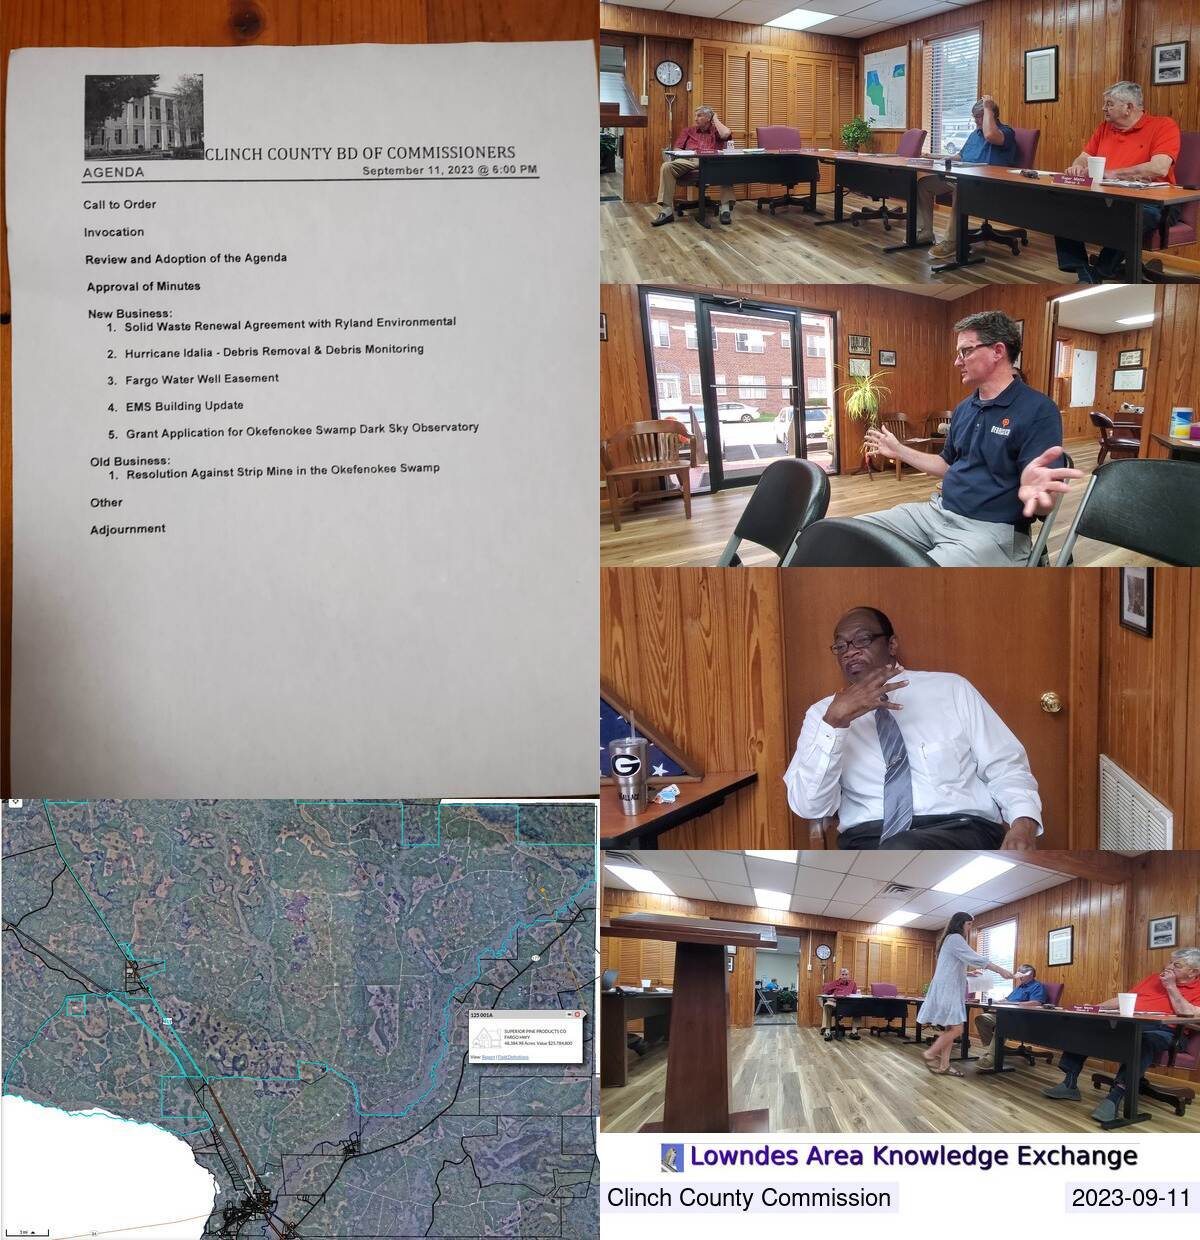 [Collage @ Clinch County Commission 2023-09-11]